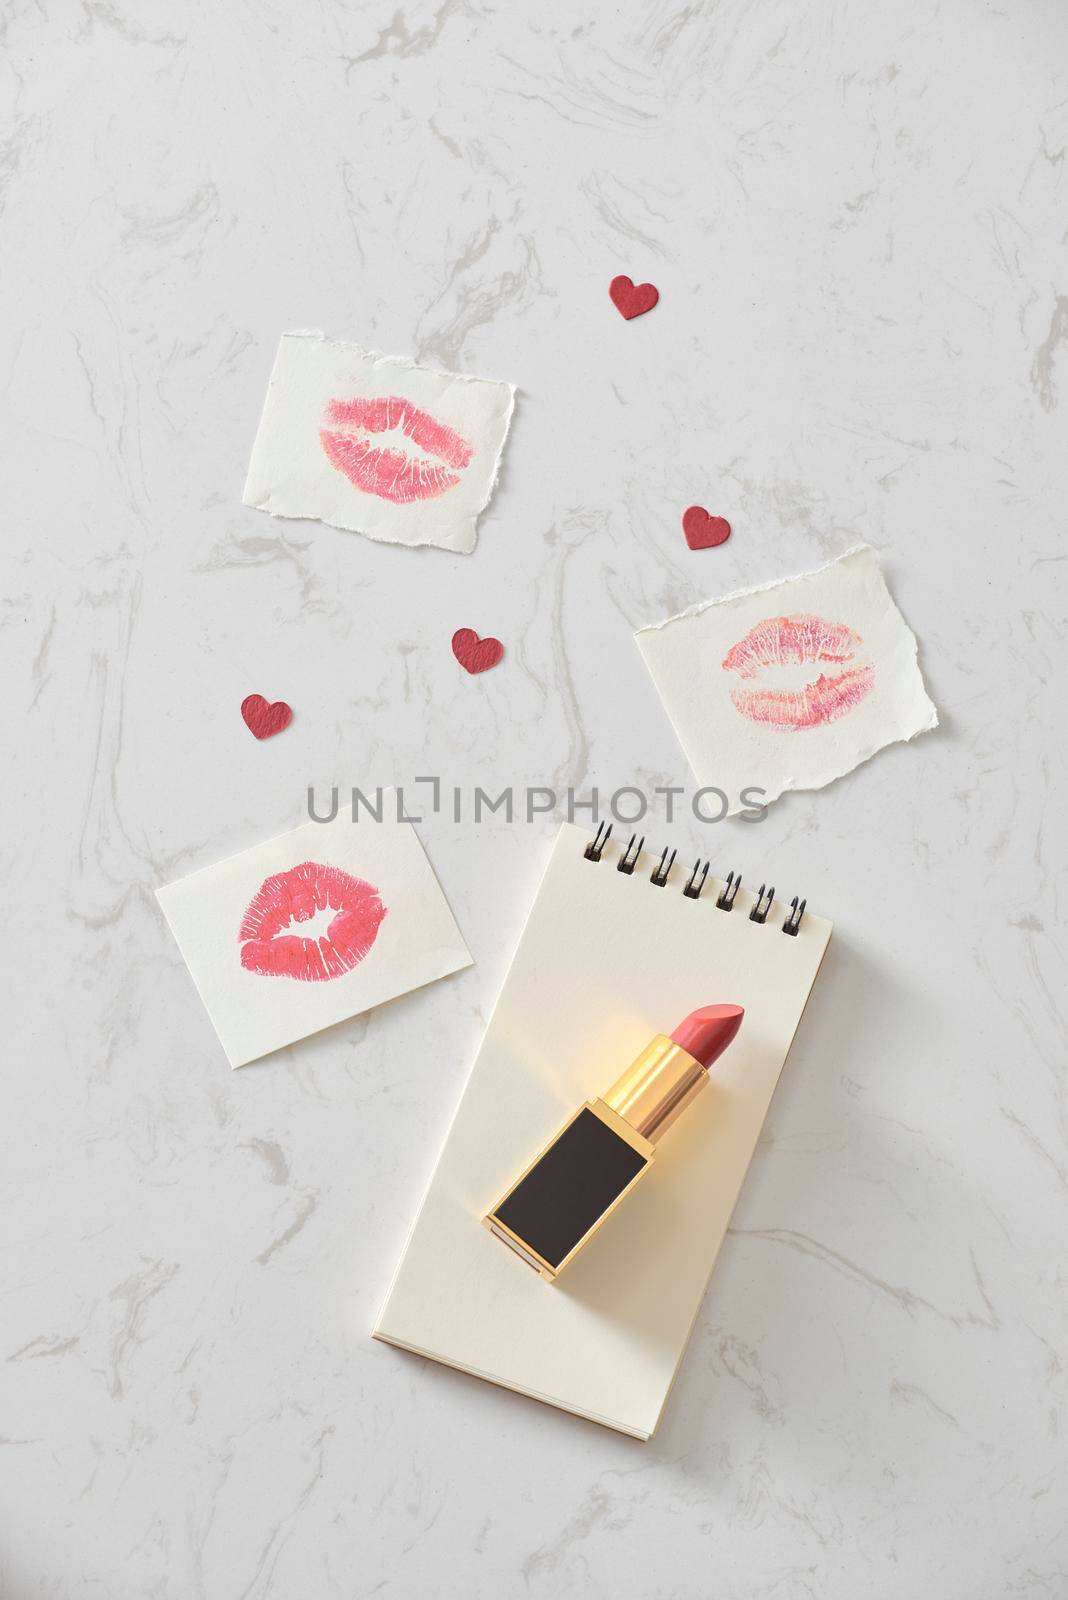 Love valentine together happy affection concept with lipstick and lipstick kiss mark by makidotvn